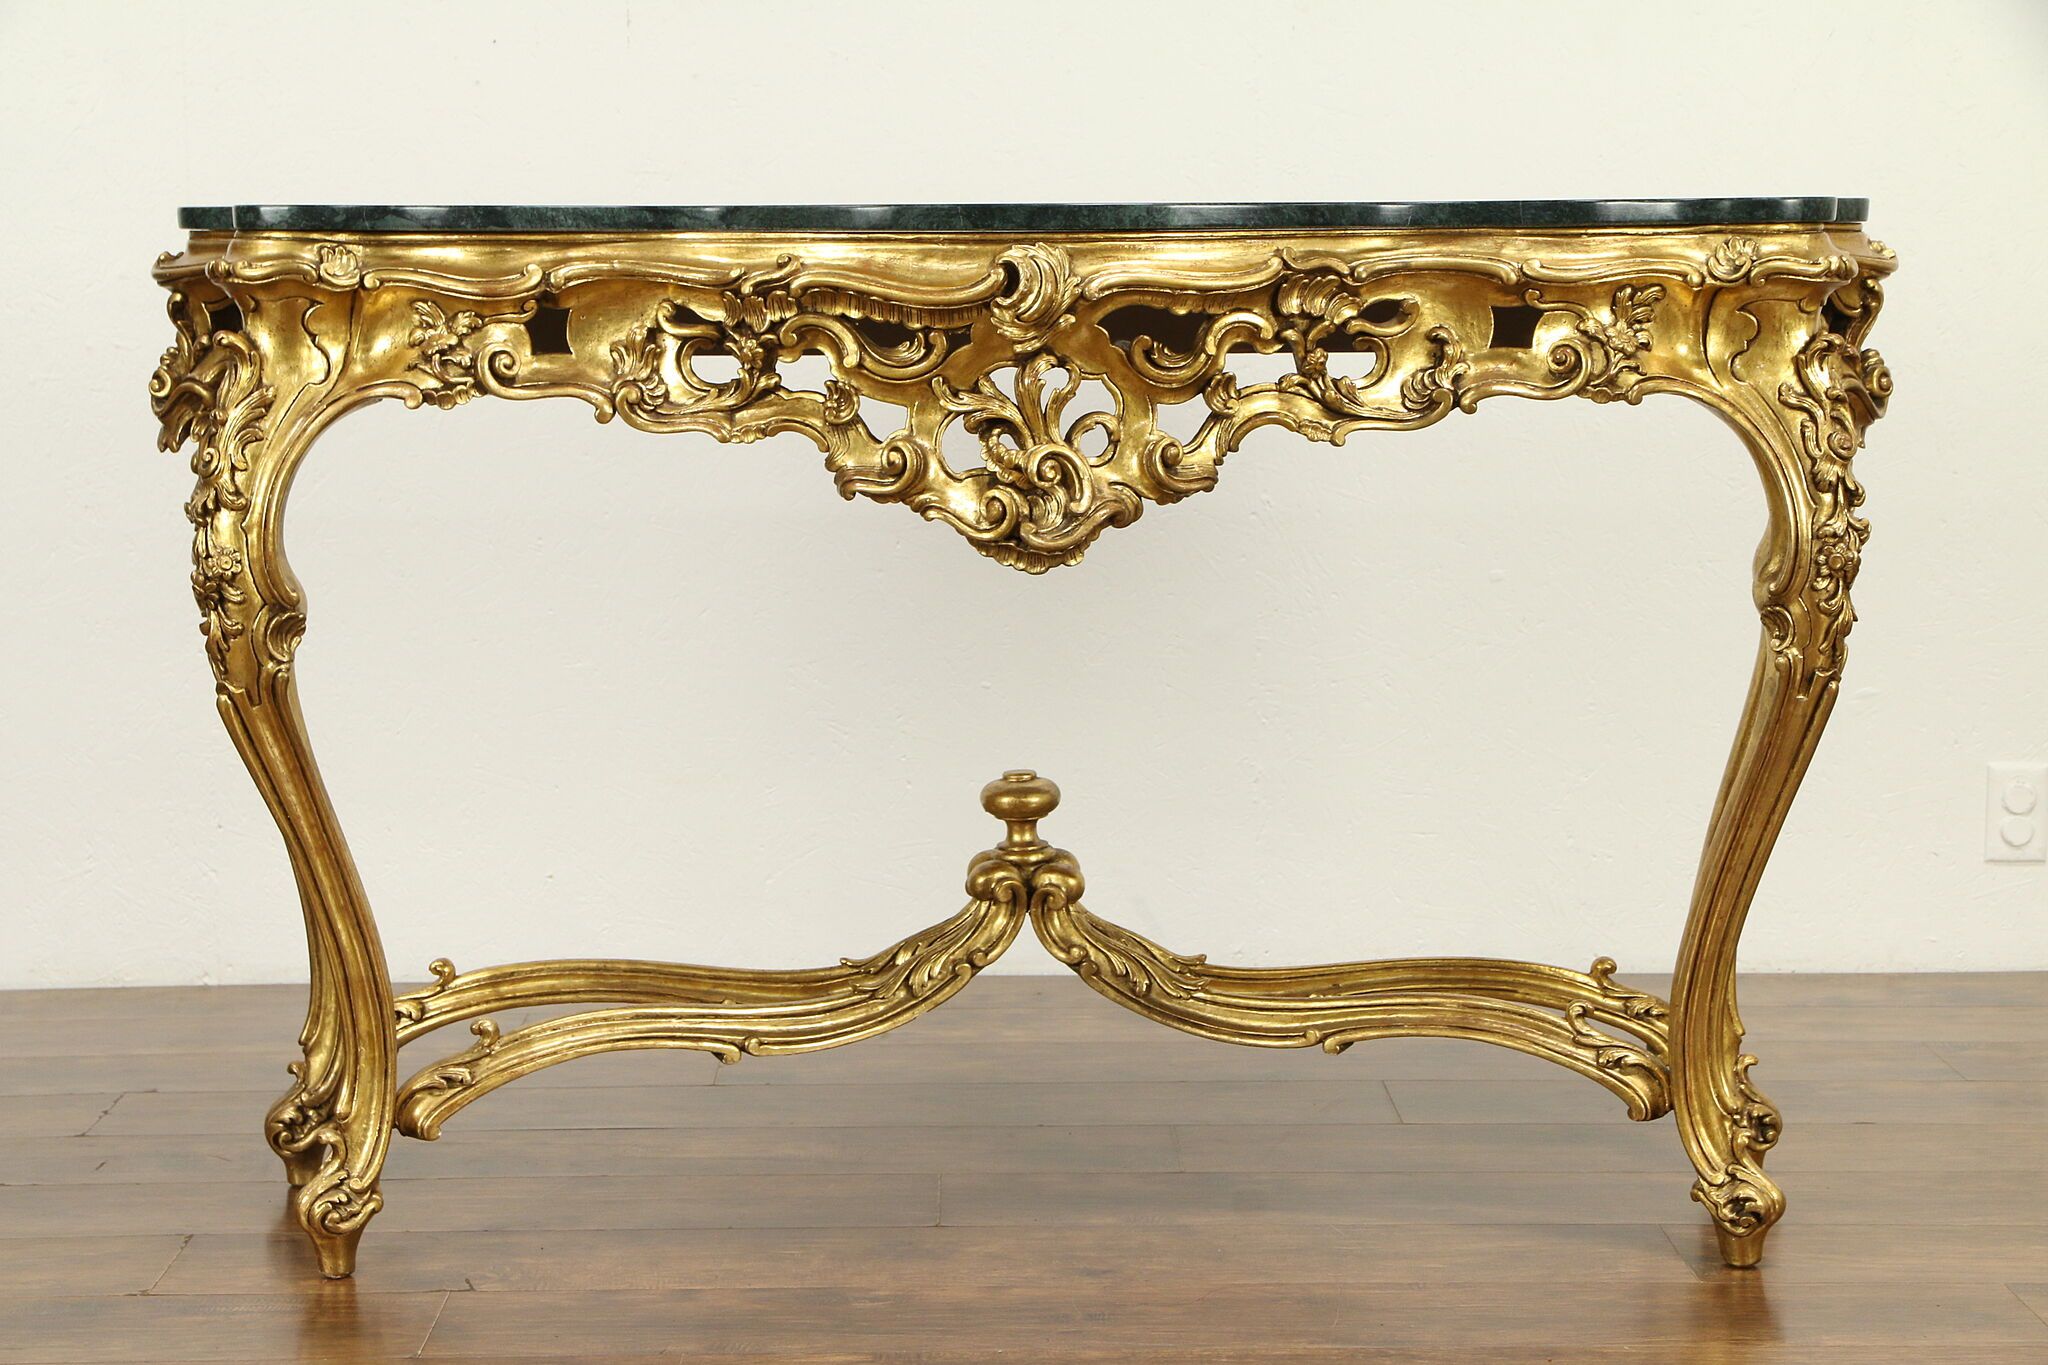 Sold – Italian Vintage Baroque Carved Gold Leaf Console Throughout Antiqued Gold Leaf Console Tables (View 5 of 20)